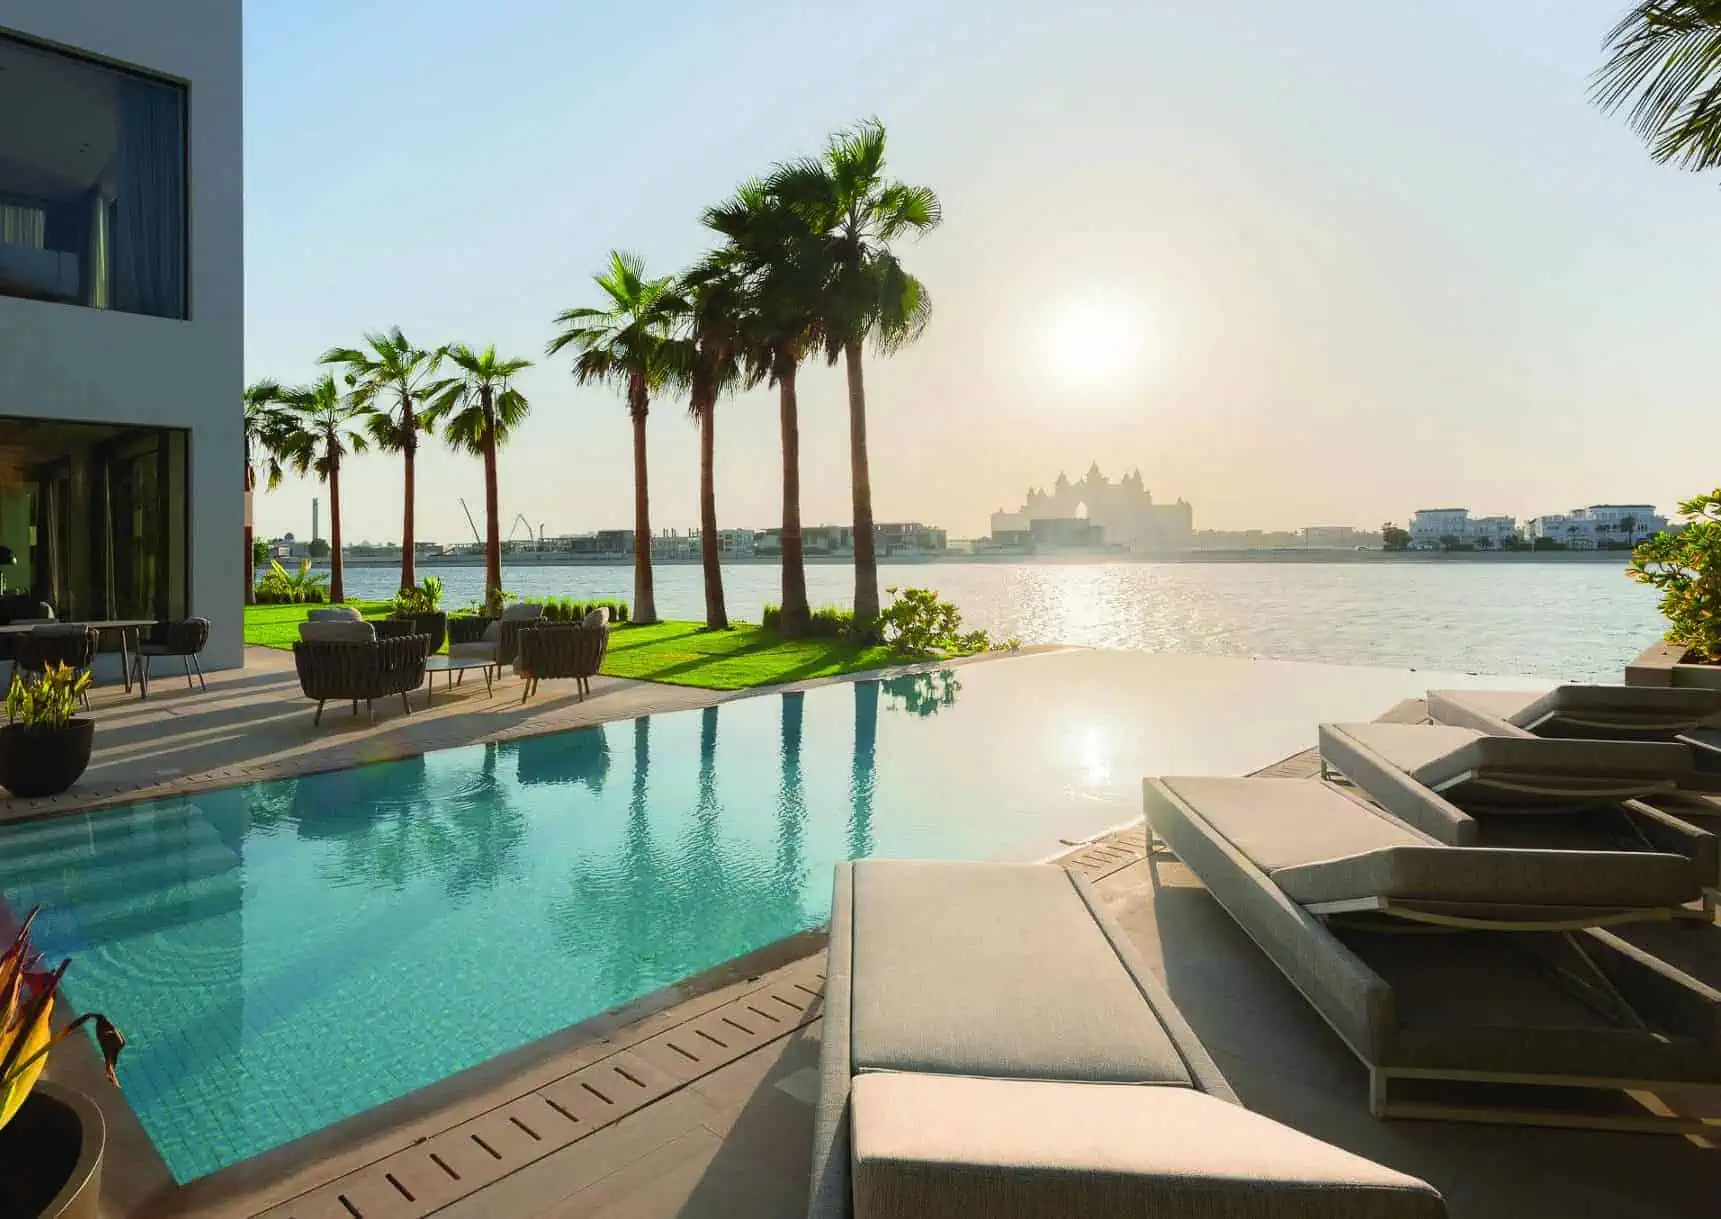 A luxurious villa nestled in the heart of Dubai's Palm, offering a serene and opulent retreat.